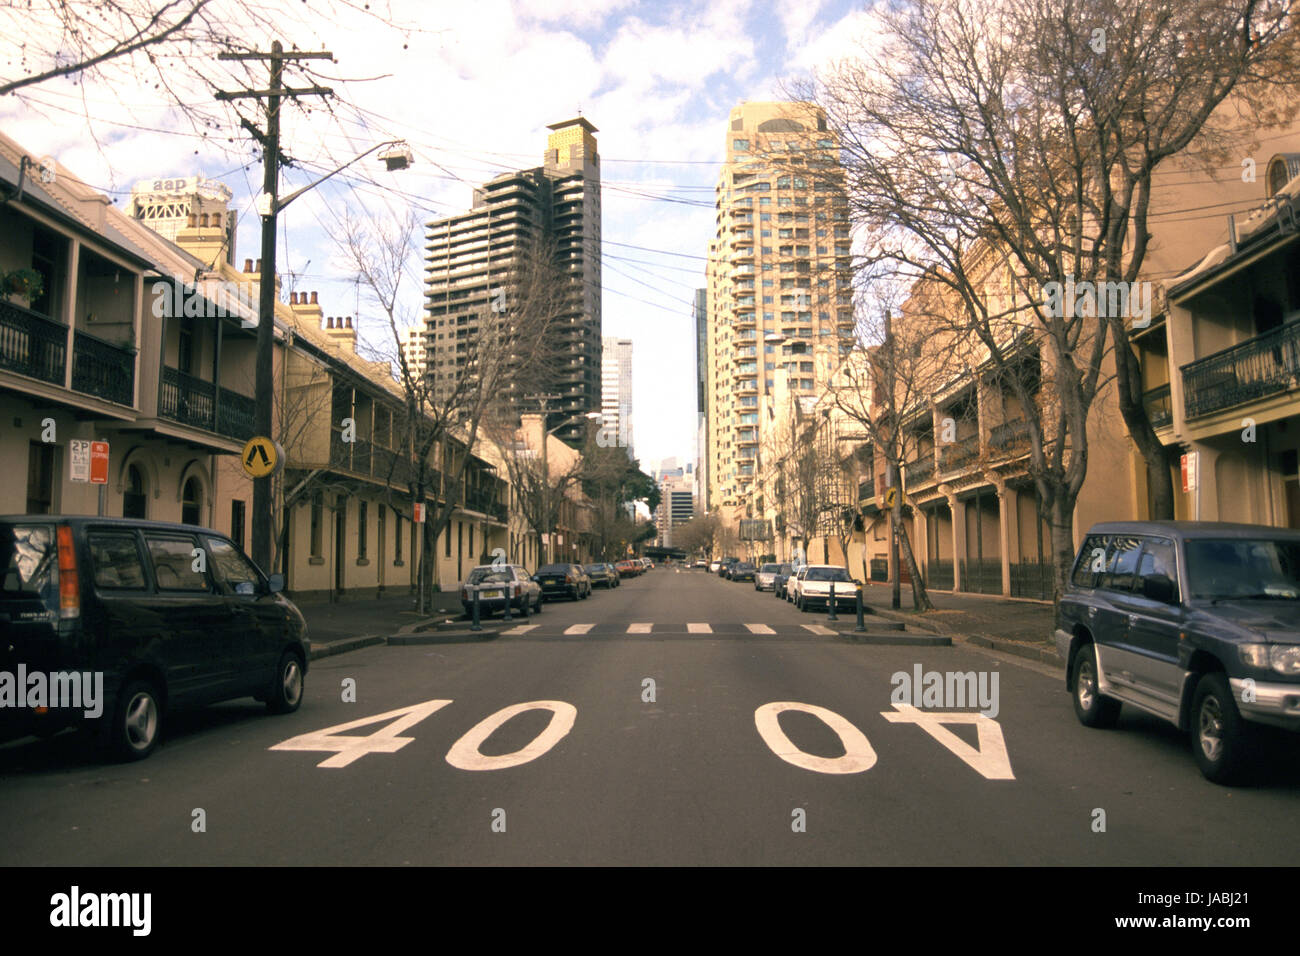 Sydney street scene featuring terraced houses in the inner-city suburb of Surry Hills and showing 40 km speed restriction signs painted on the road. Stock Photo